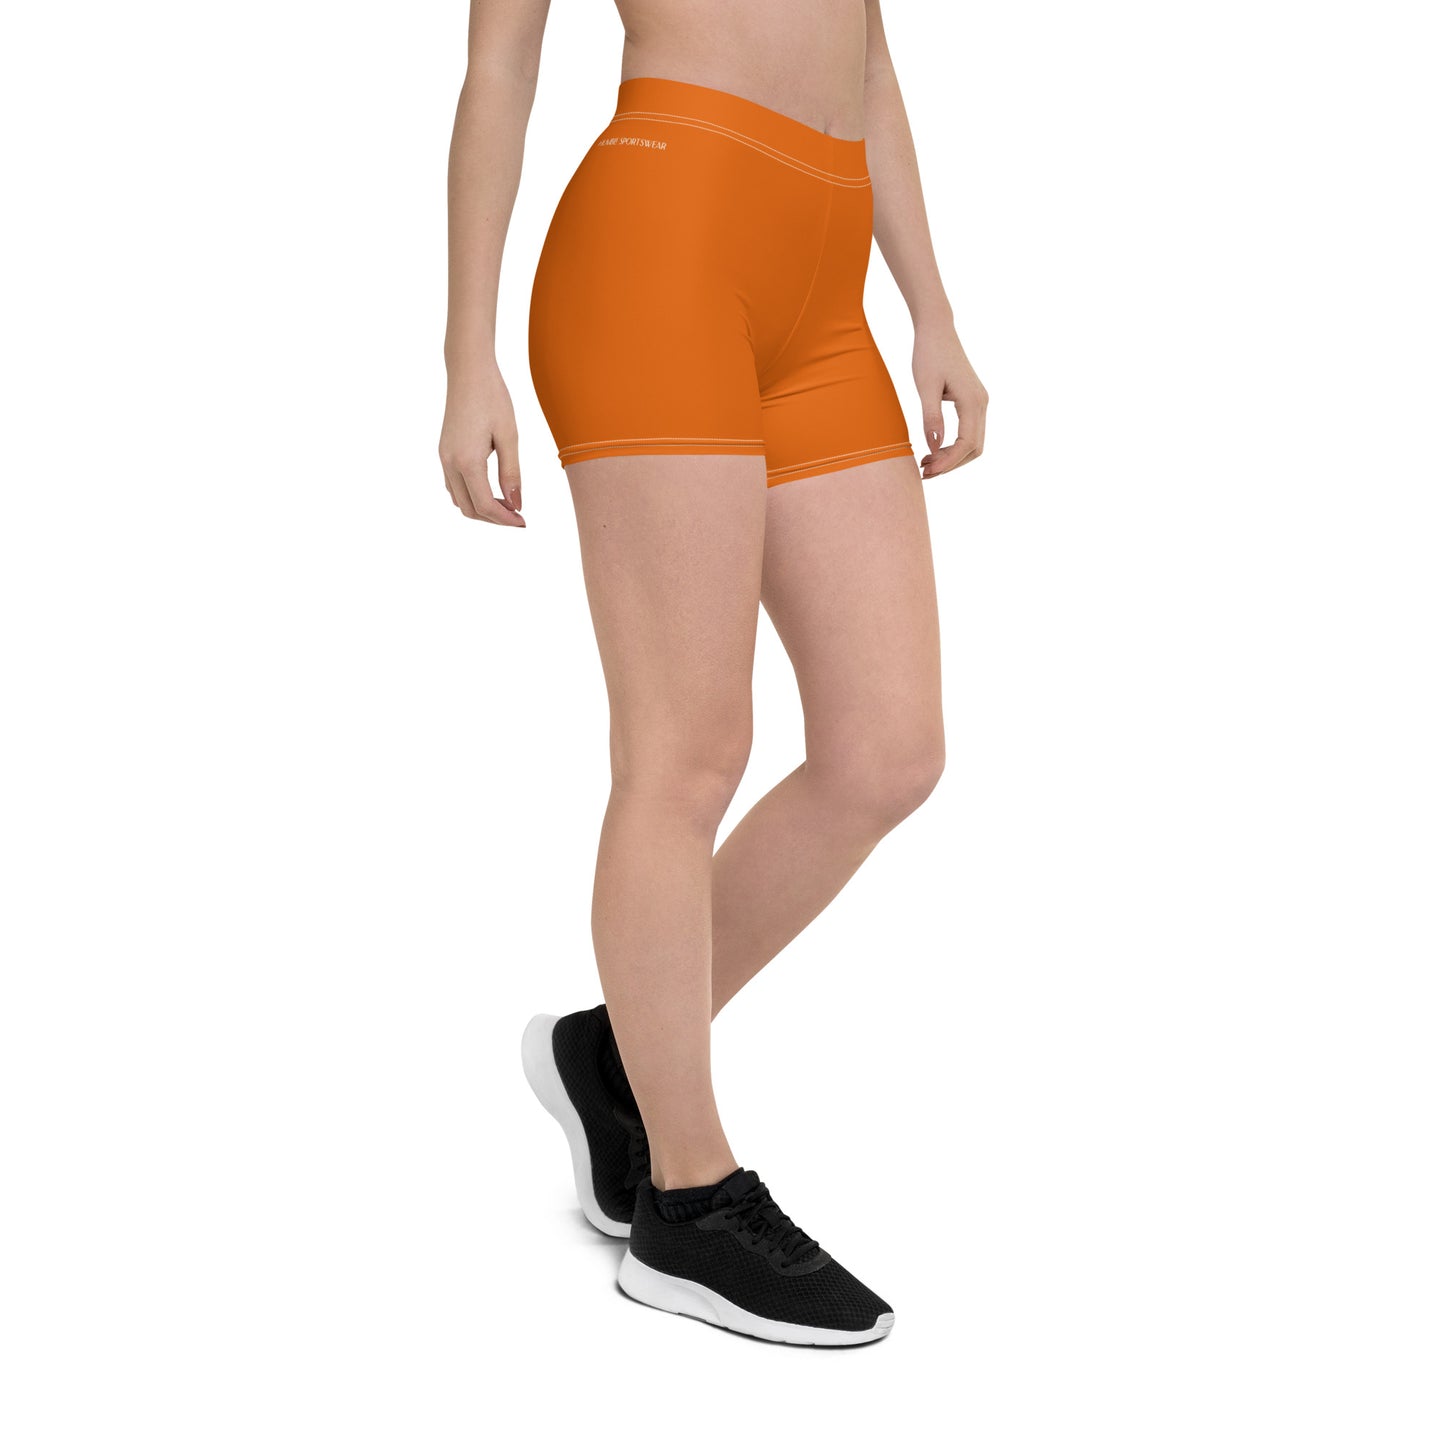 Humble Sportswear women's Color Match orange stretchy bike shorts for activewear